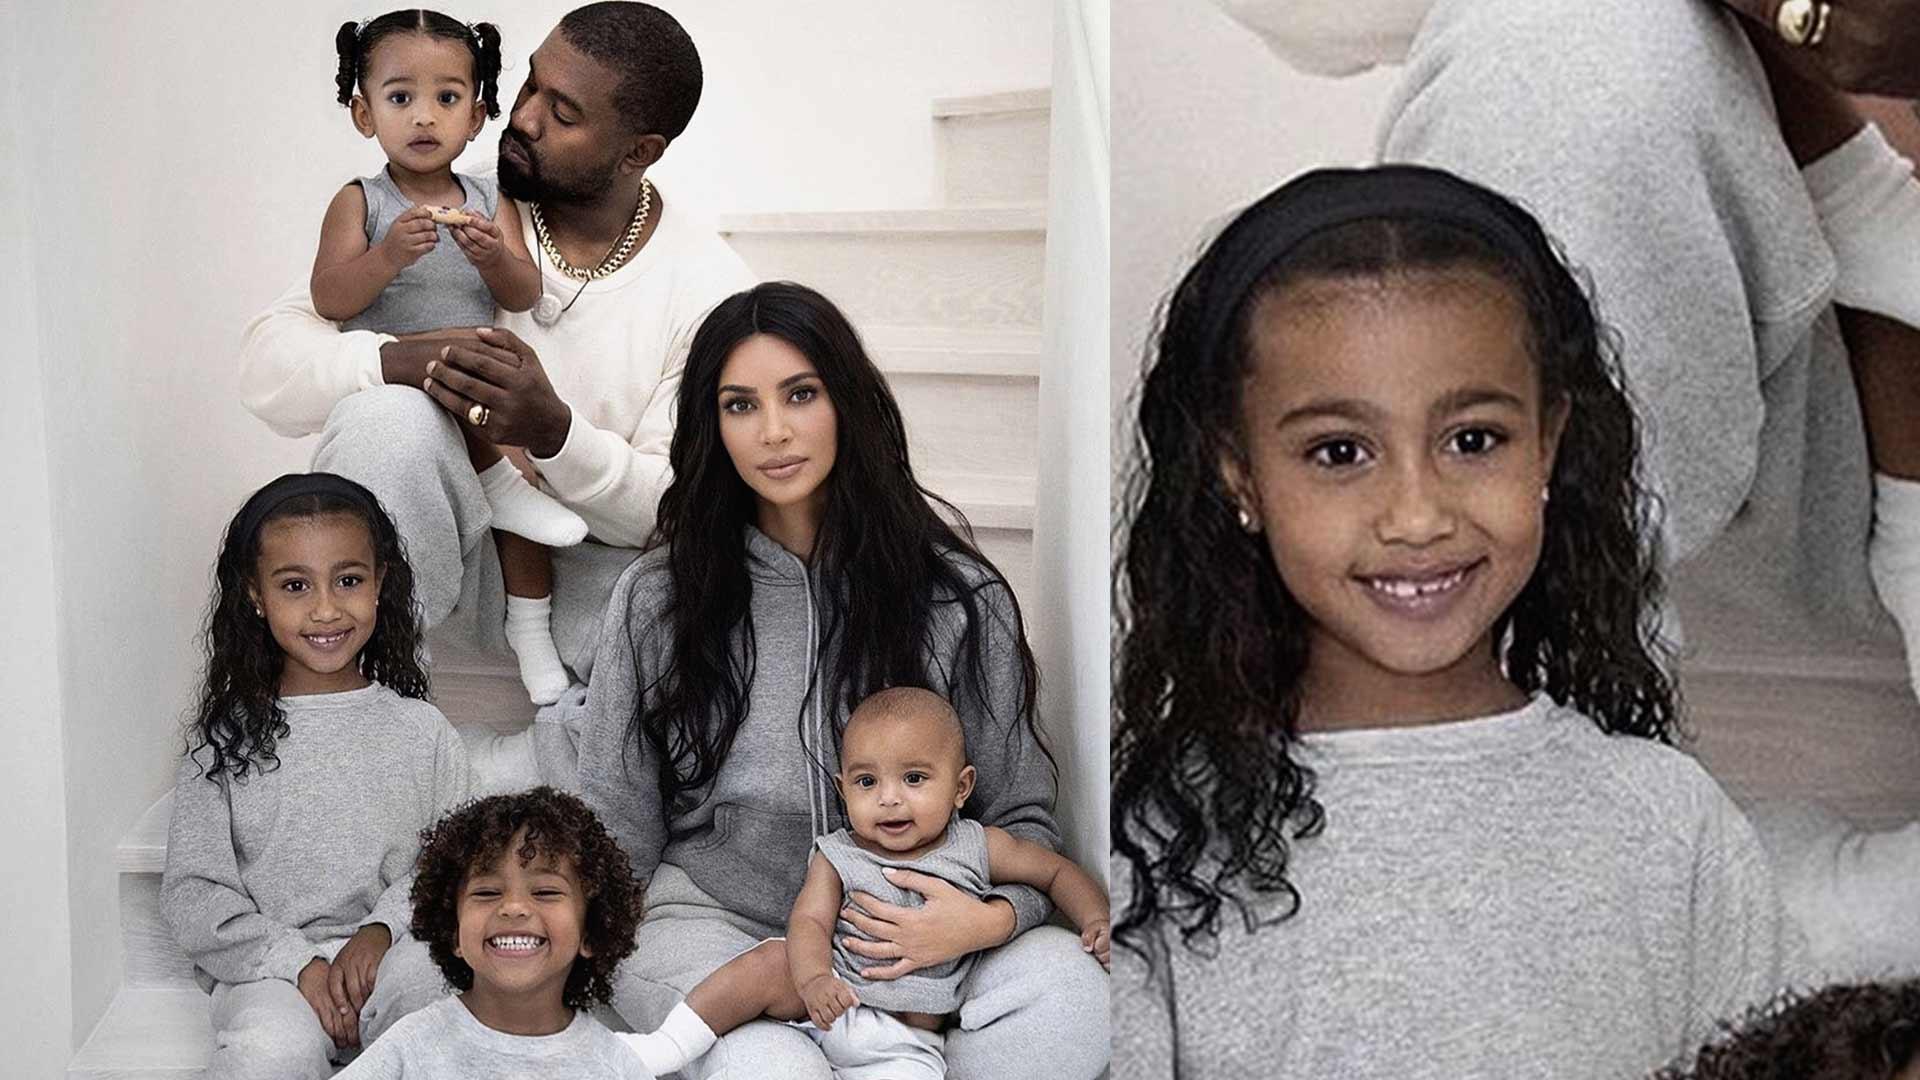 Why North West Was Photoshopped Into The Family Christmas Card